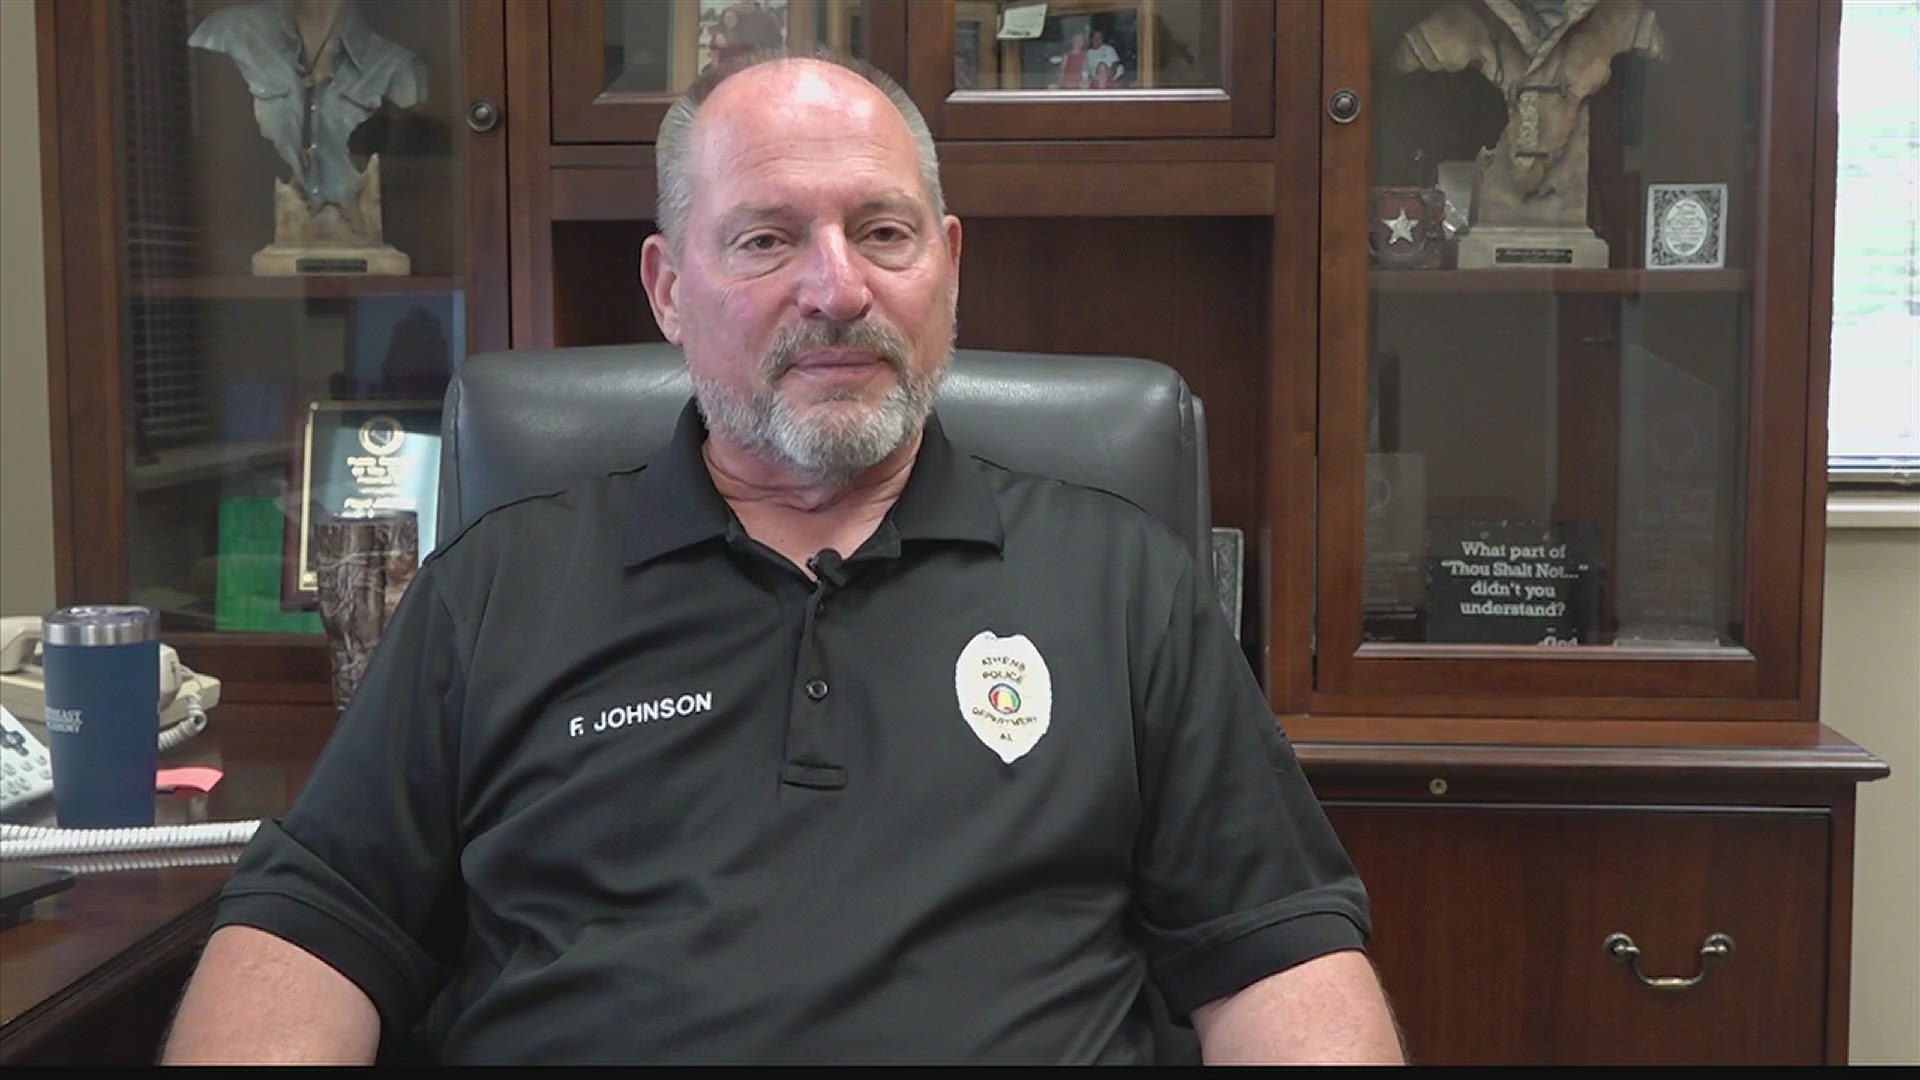 Athens Police Chief Floyd Johnson is retiring August. He's served his community for more than 40 years.